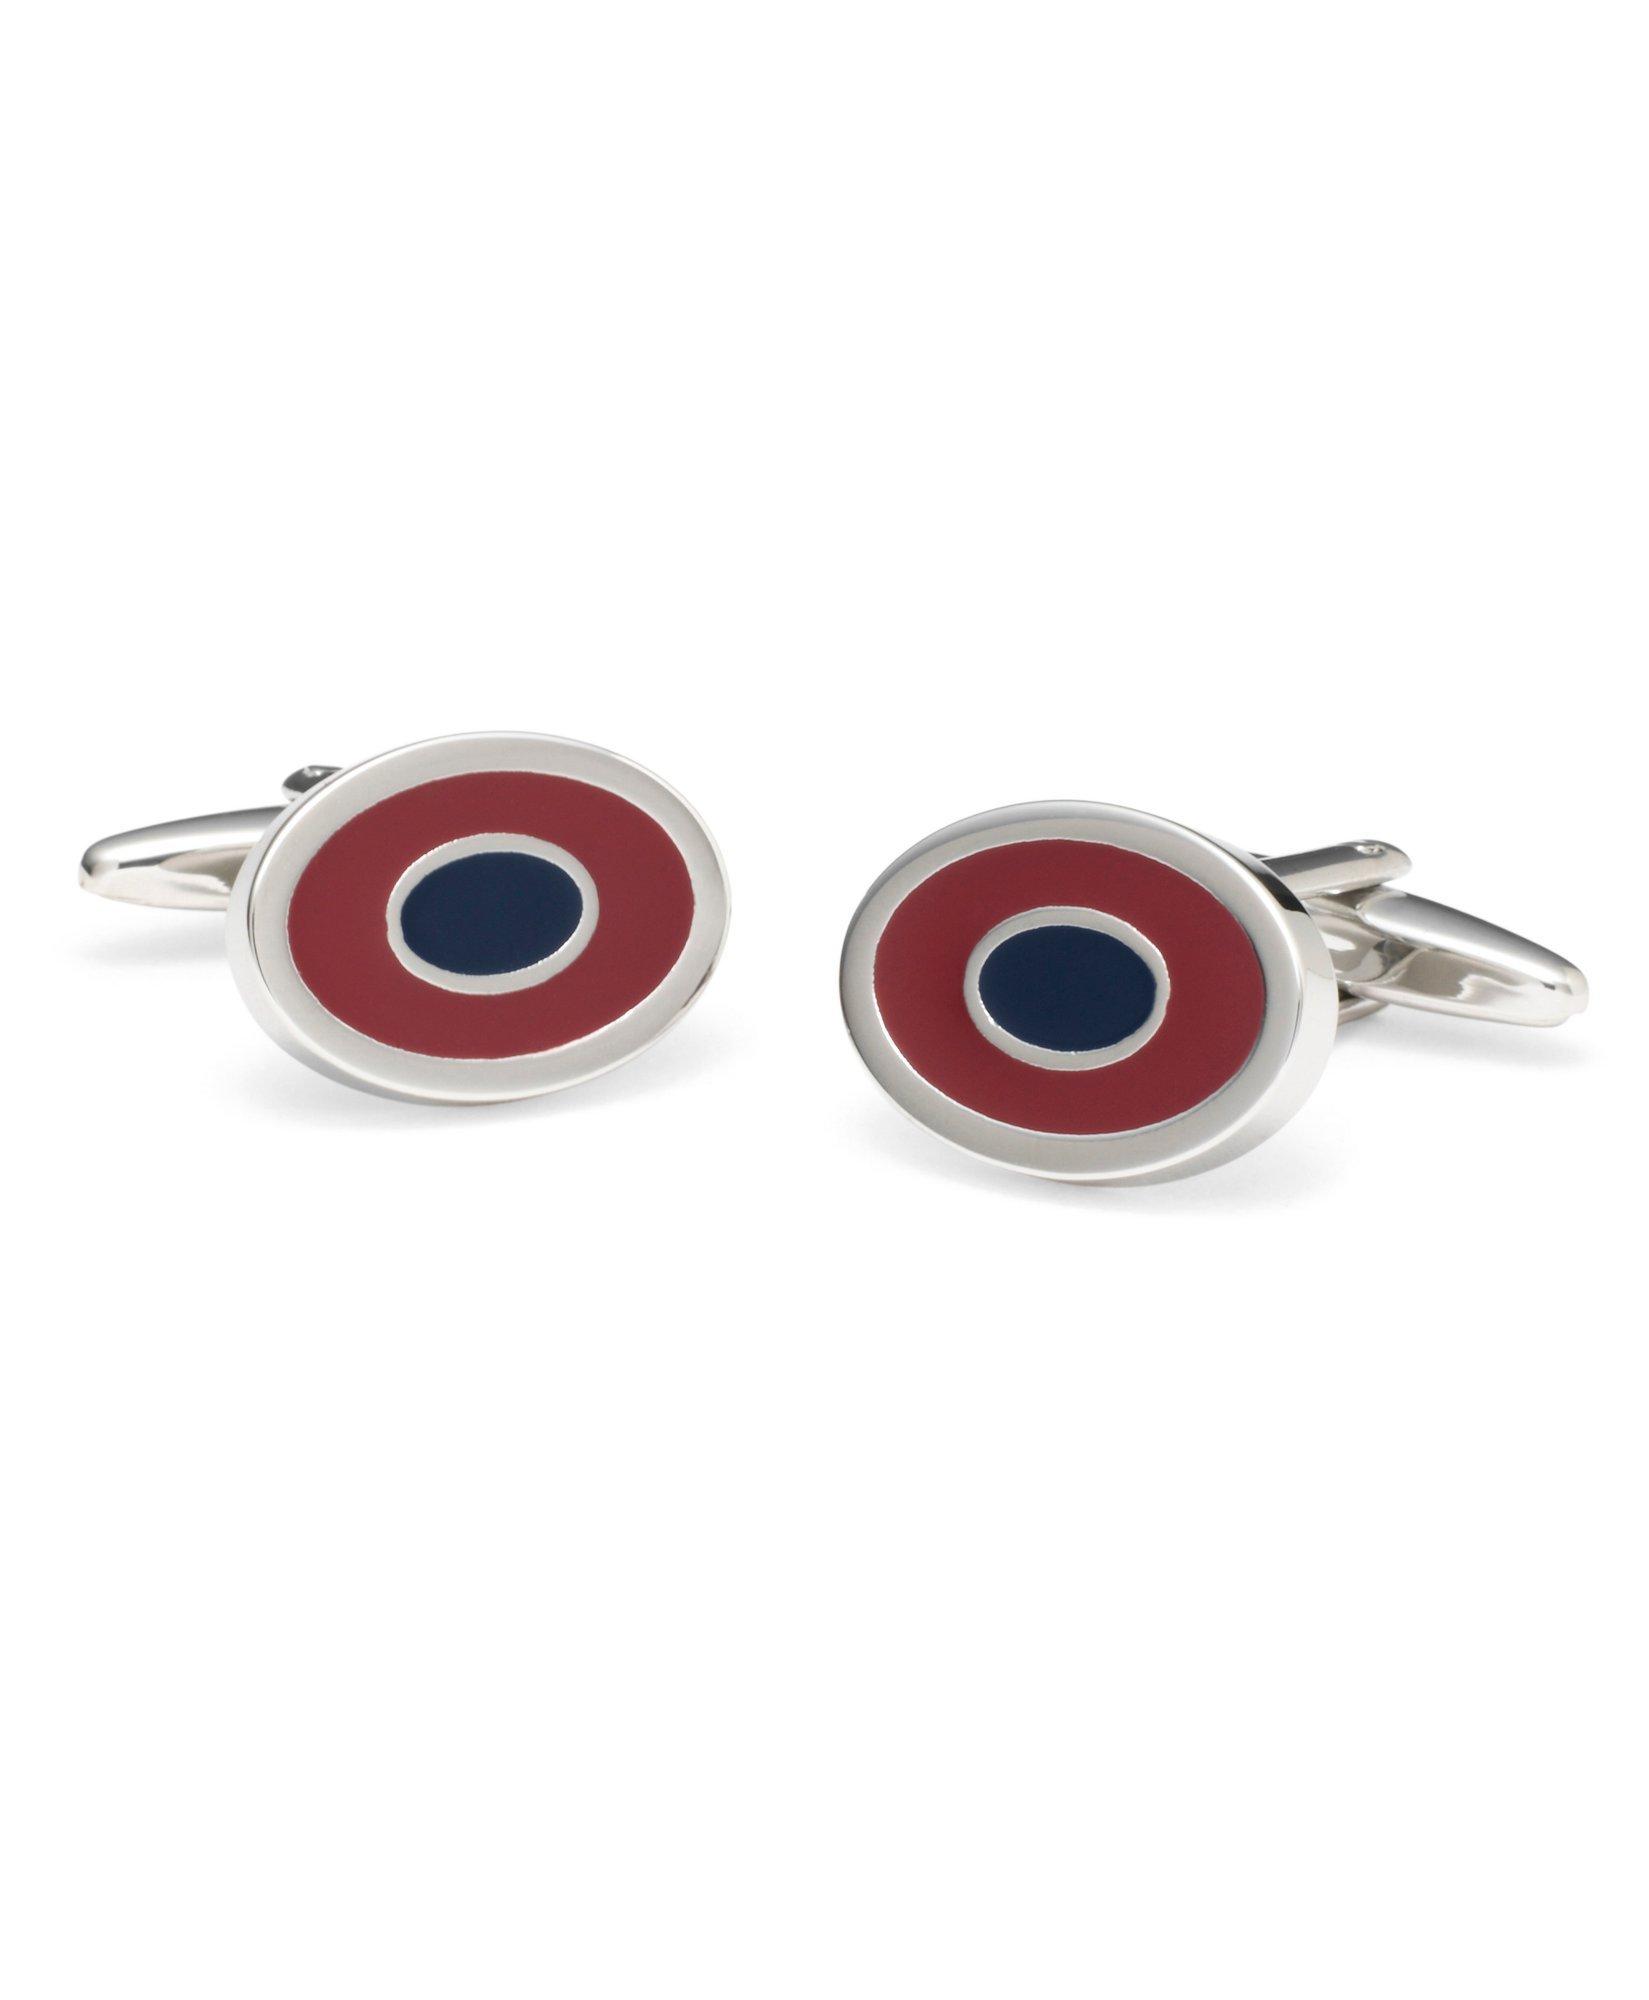 Two-Color Oval Cuff Links, image 1